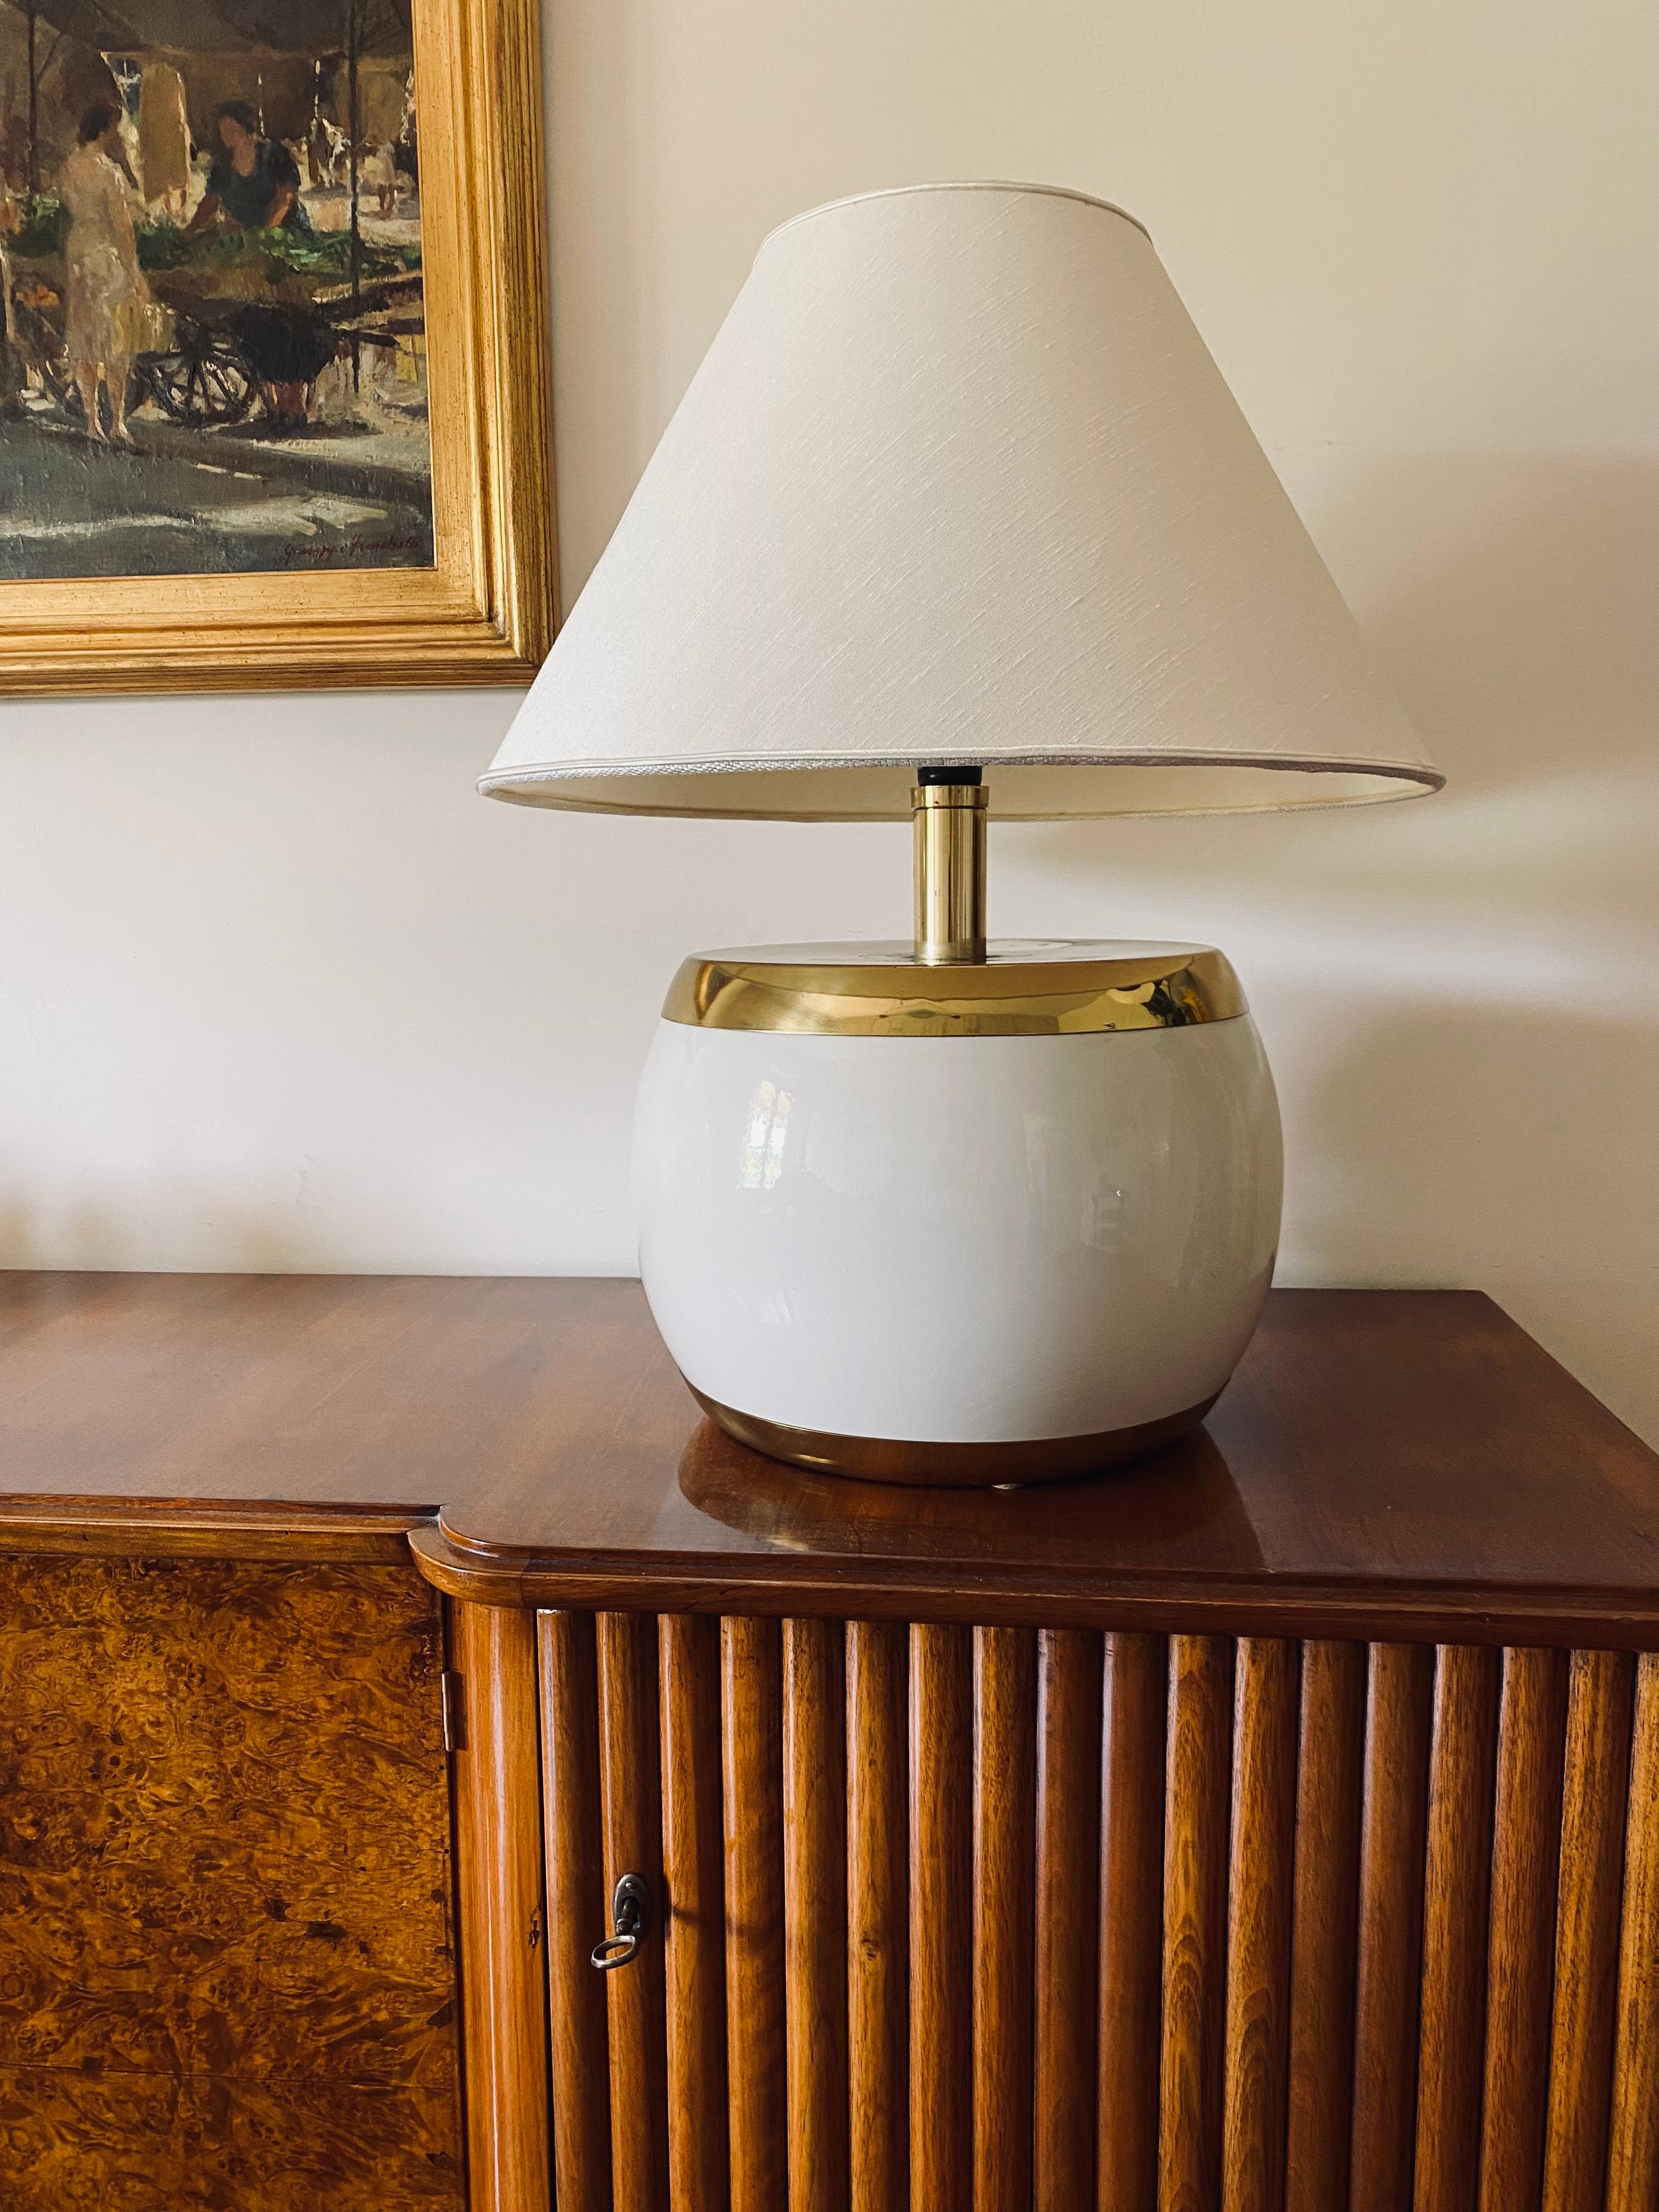 Monumental white ceramic and brass lamp base

Italy 1970s

White ceramic base. Brass details.

Lampshade not included.

H 45.5 cm - diam. 34 cm

Condition: very good, consistent with age and use. Worn brass stain on top.